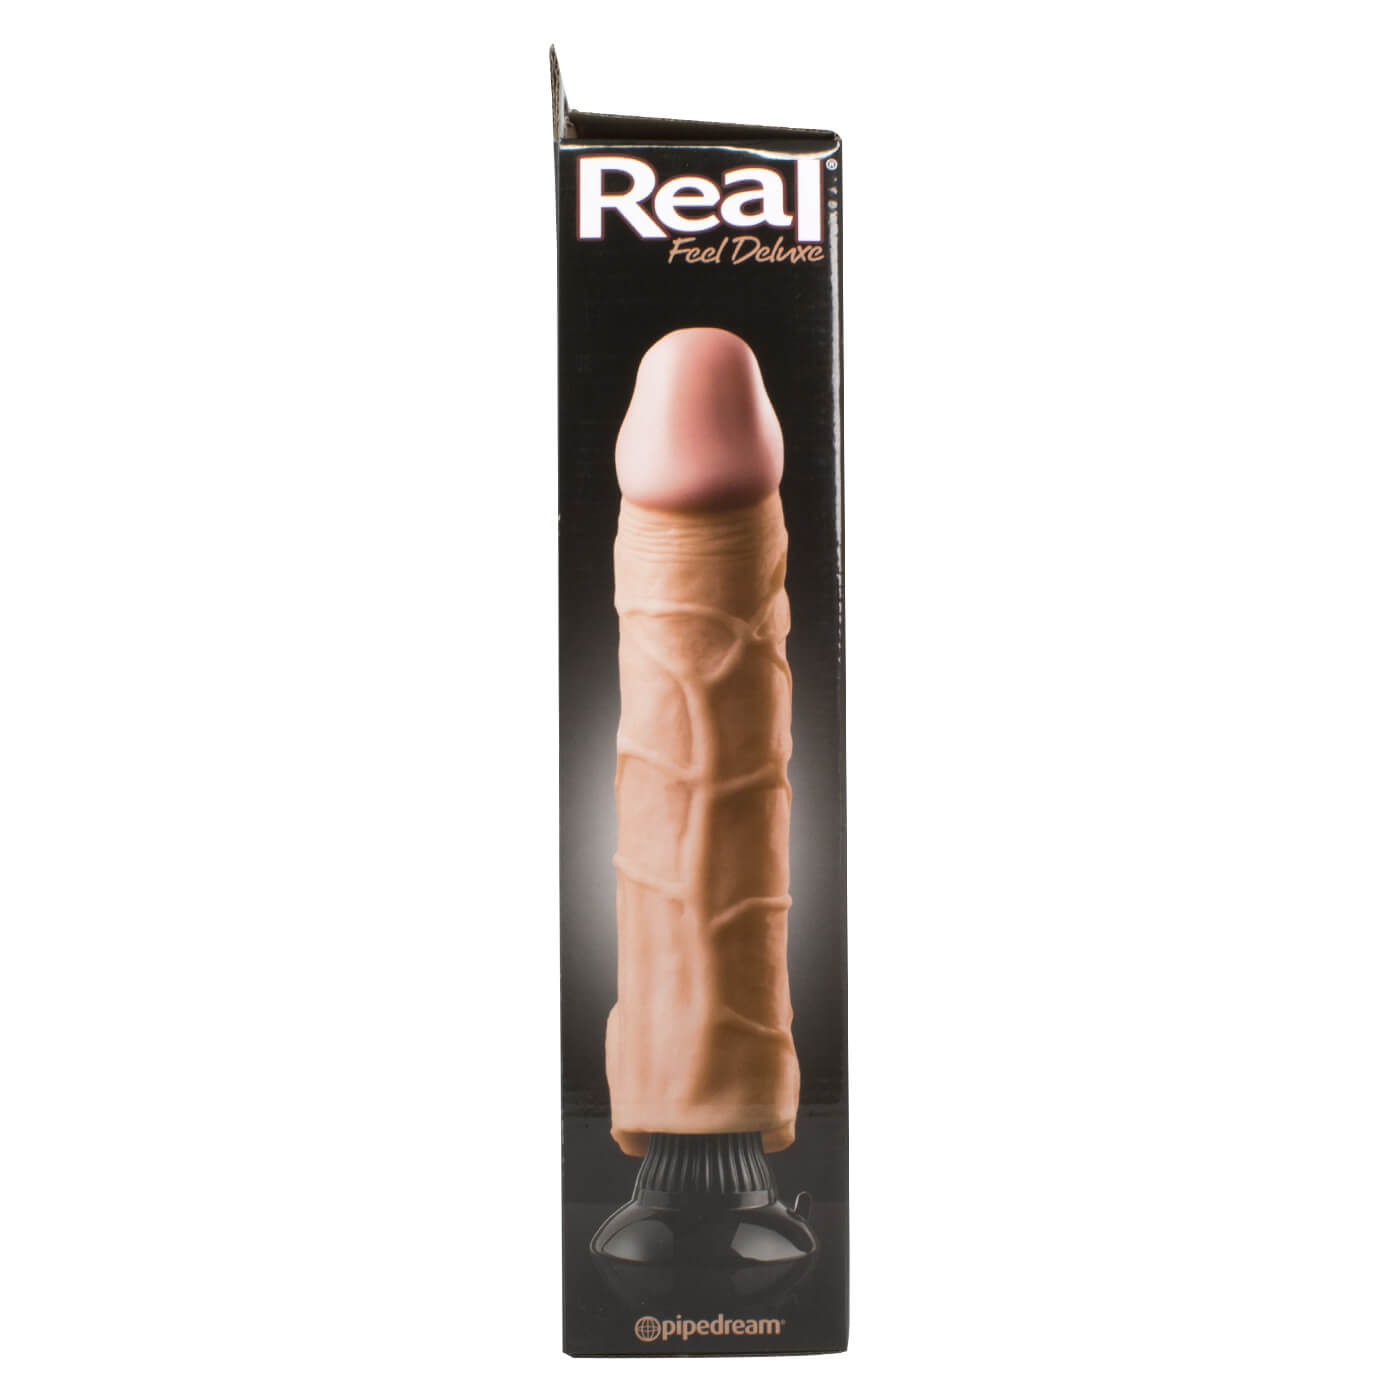 Real Feel Deluxe No.11 Realistic Vibrating 11 Inch Suction Dildo